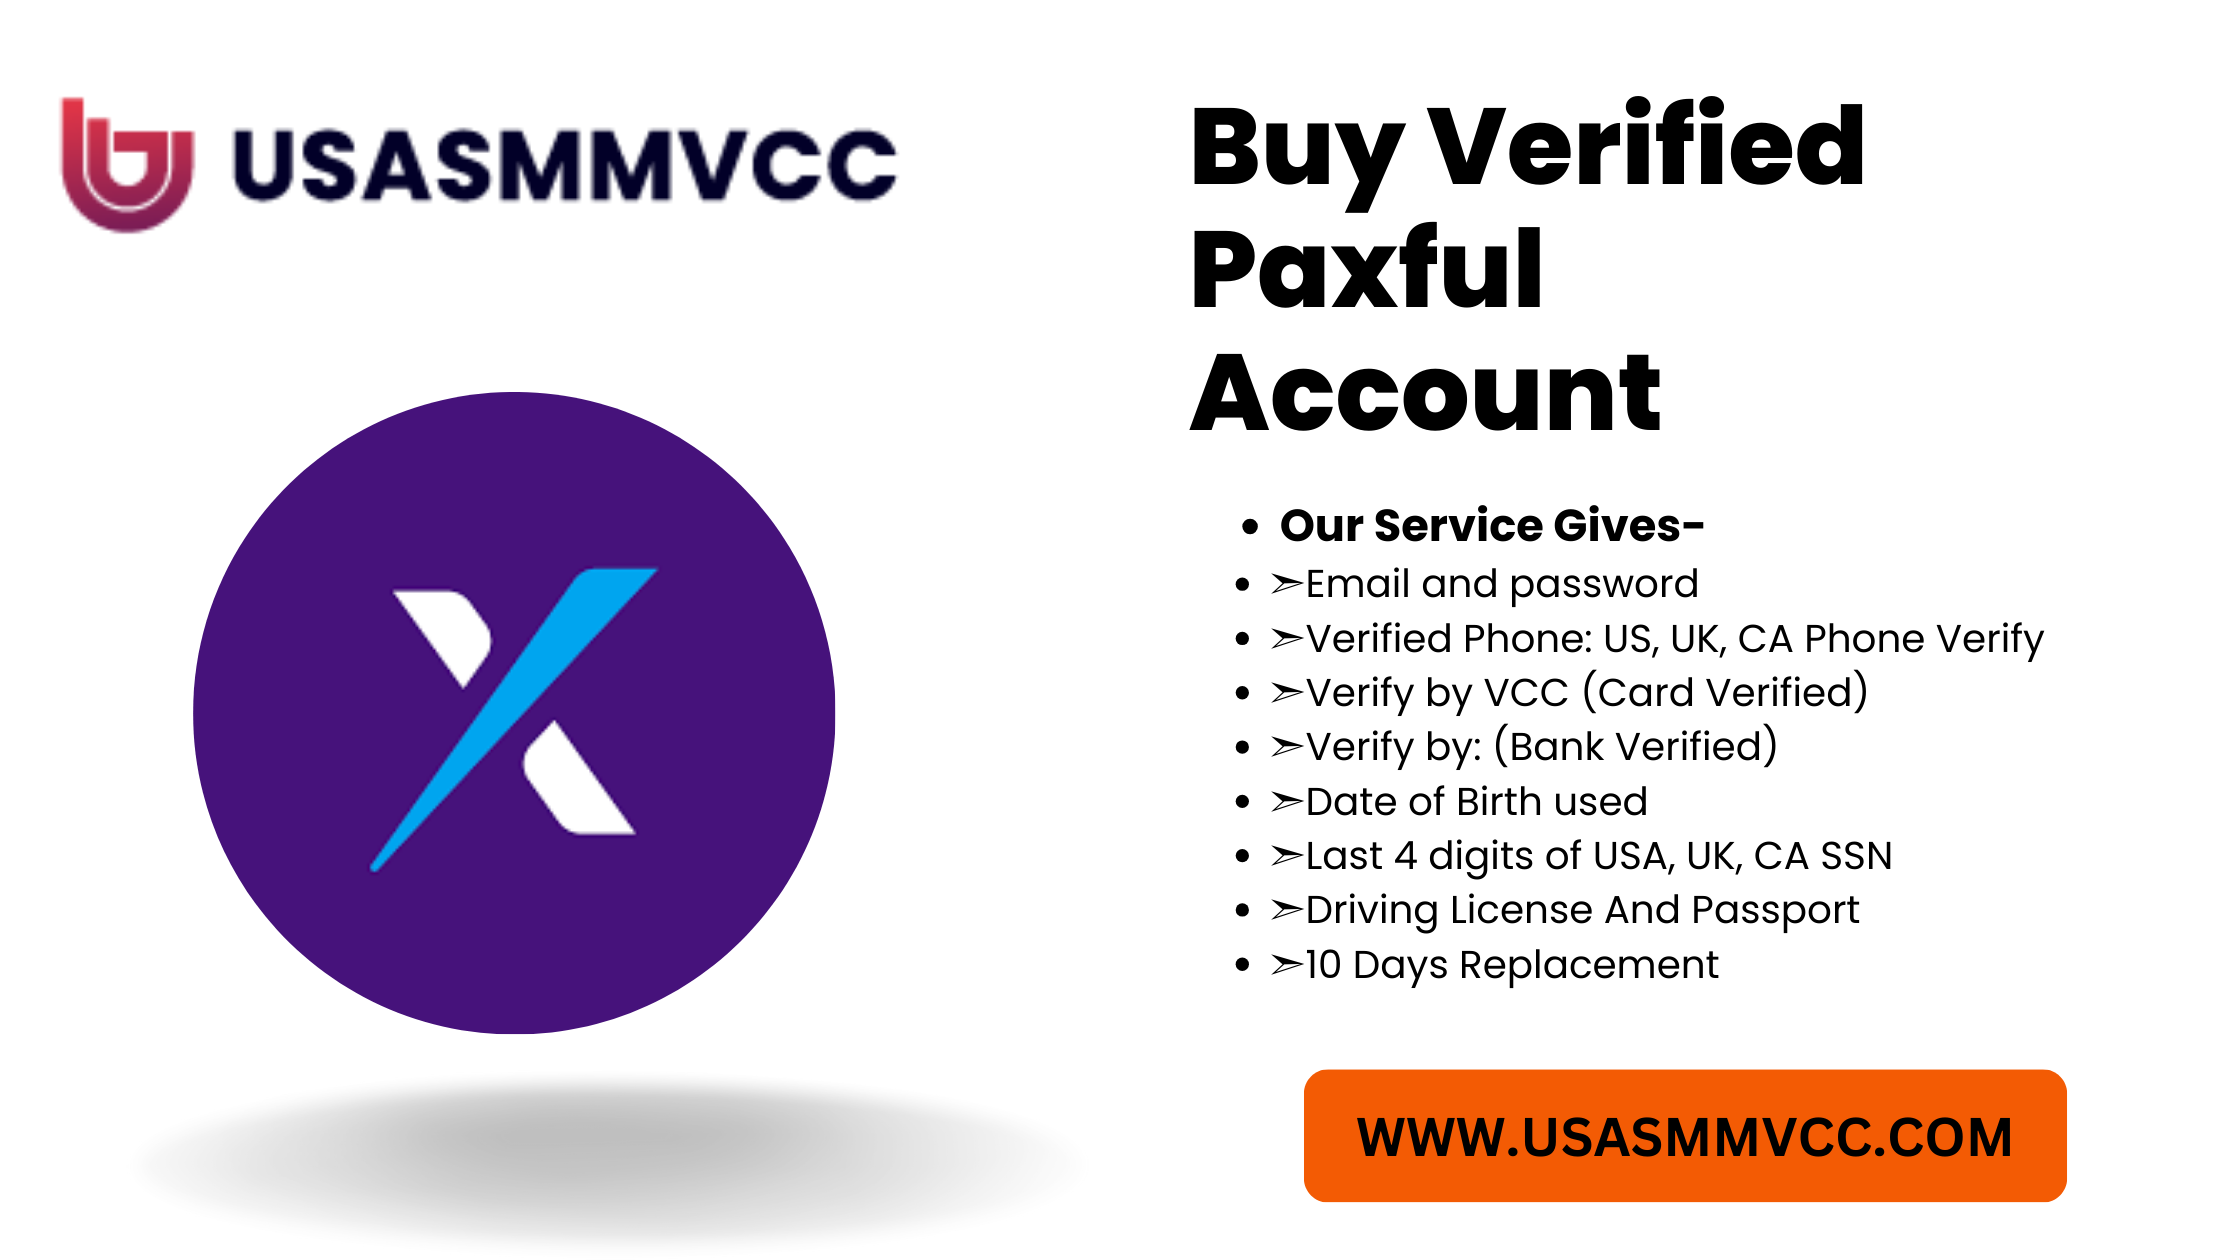 Buy Verified Paxful Account 